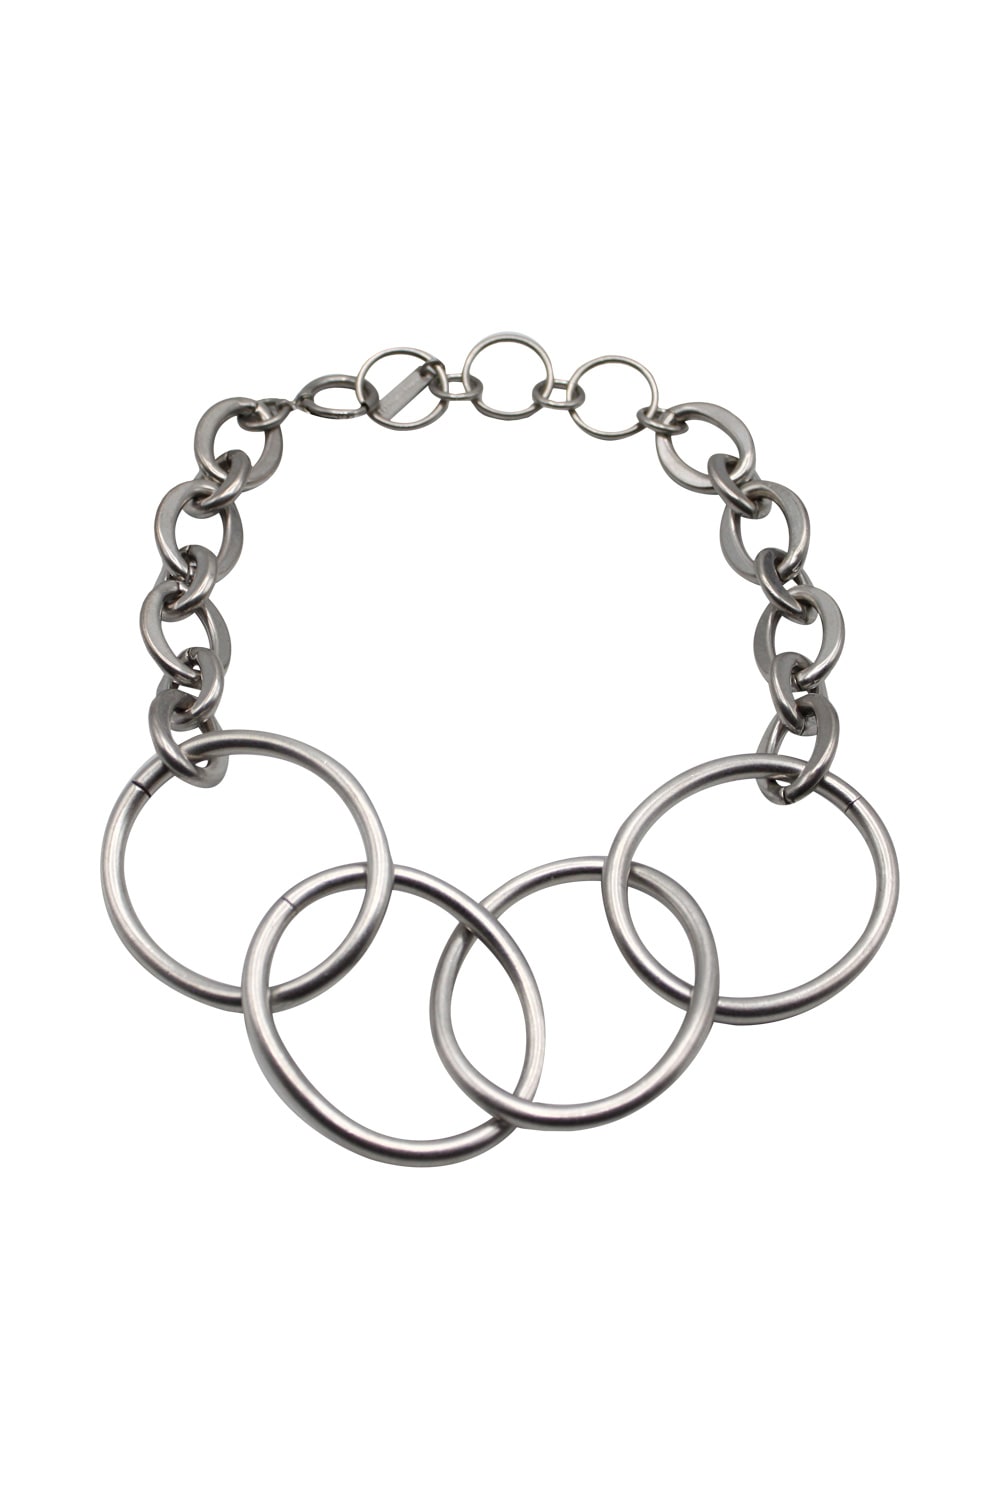 Four Ring Chain Link Necklace